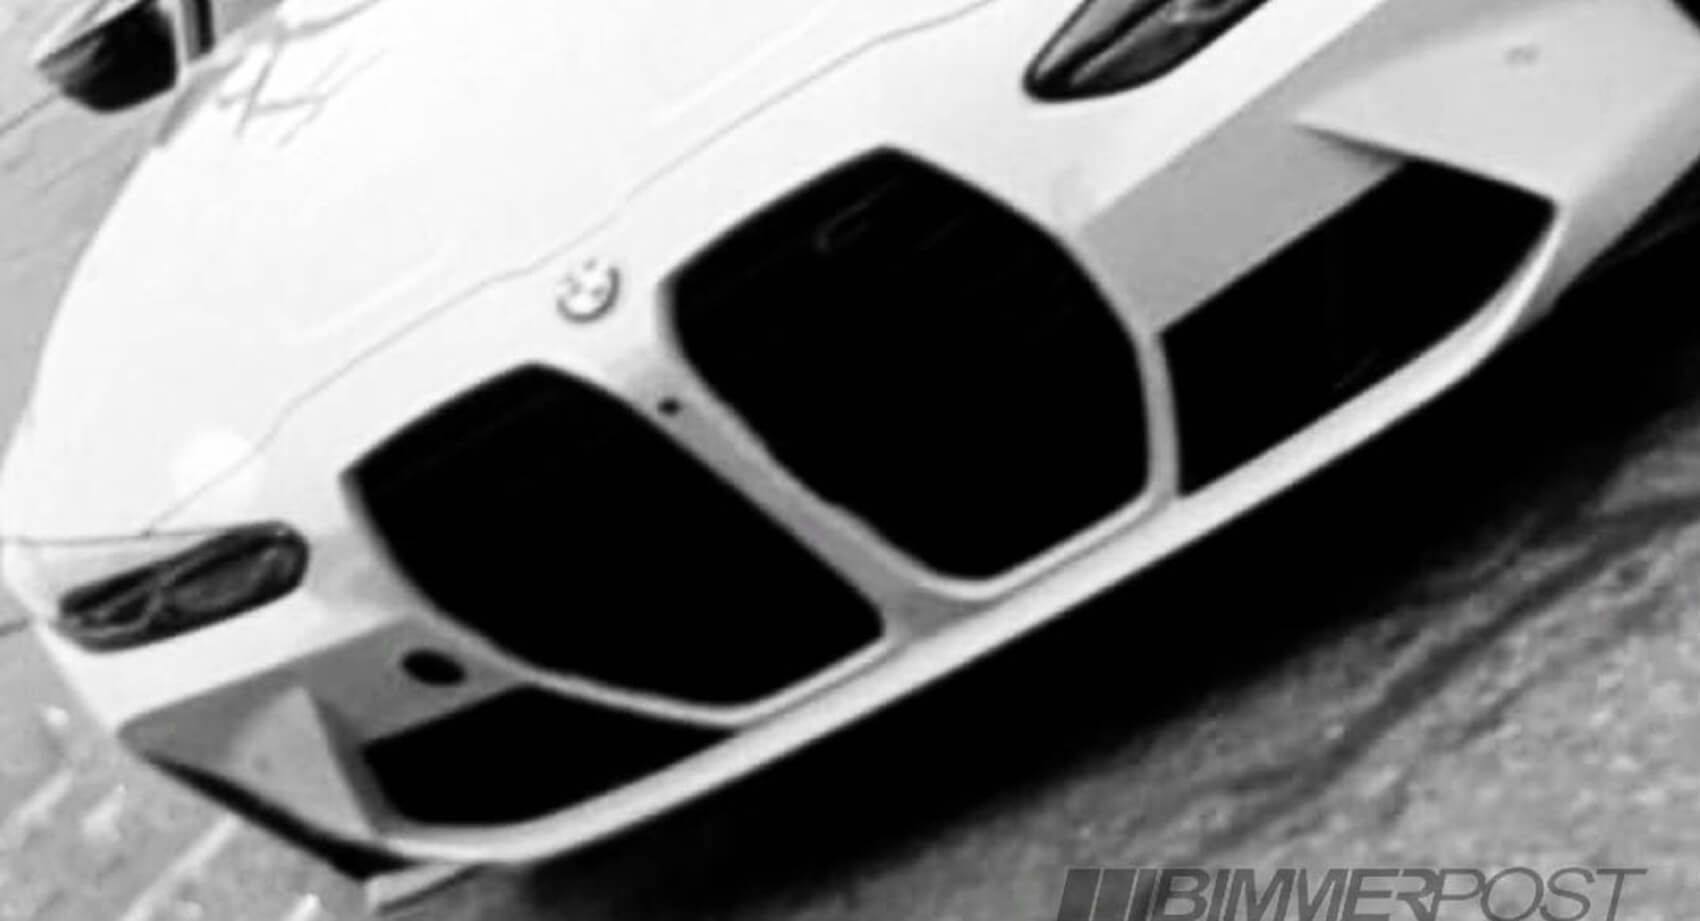 Leaked 21 Bmw M3 M4 S Massive Nostrils Can Sniff Amgs From Miles Away Carscoops